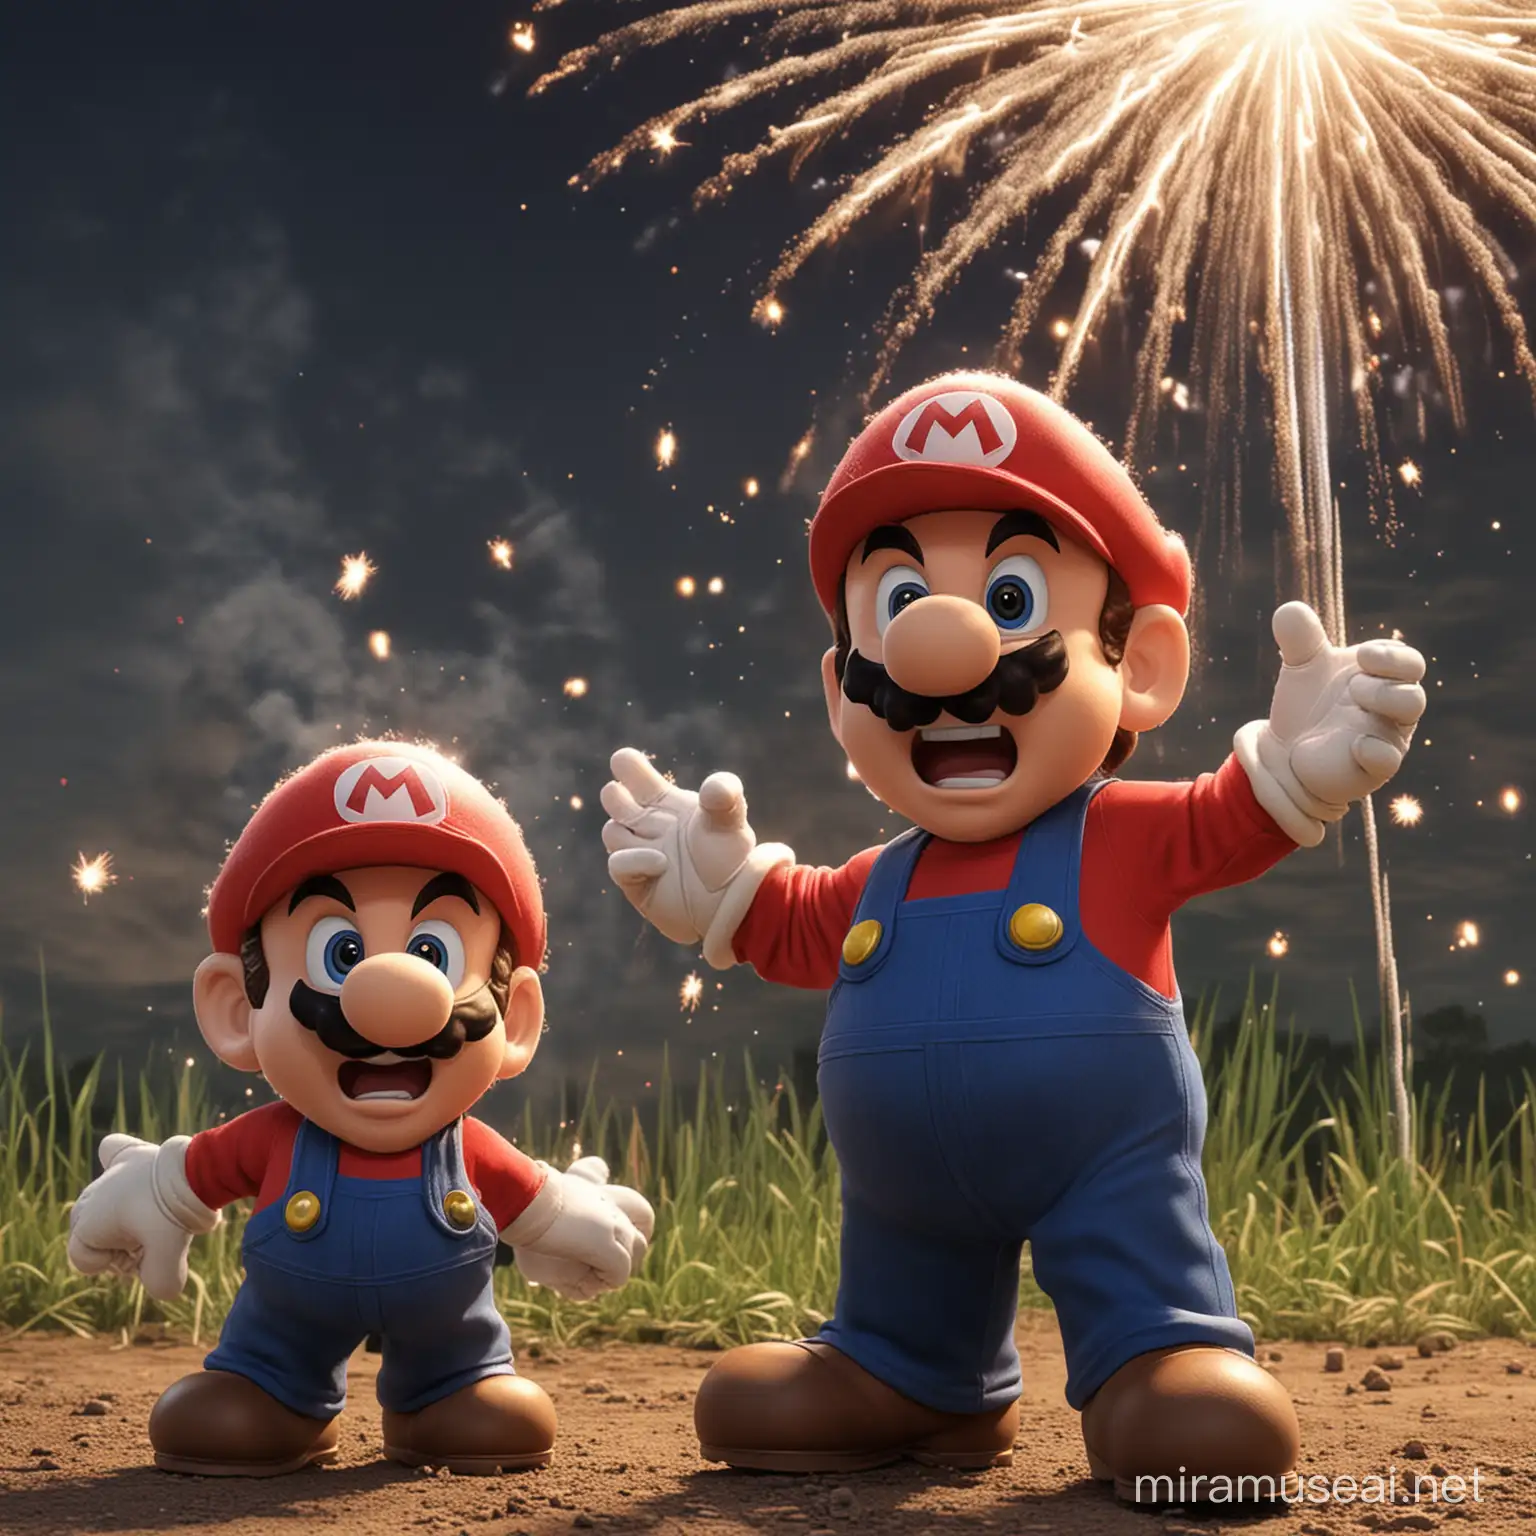 Mario and Baby Mario horrified by fireworks